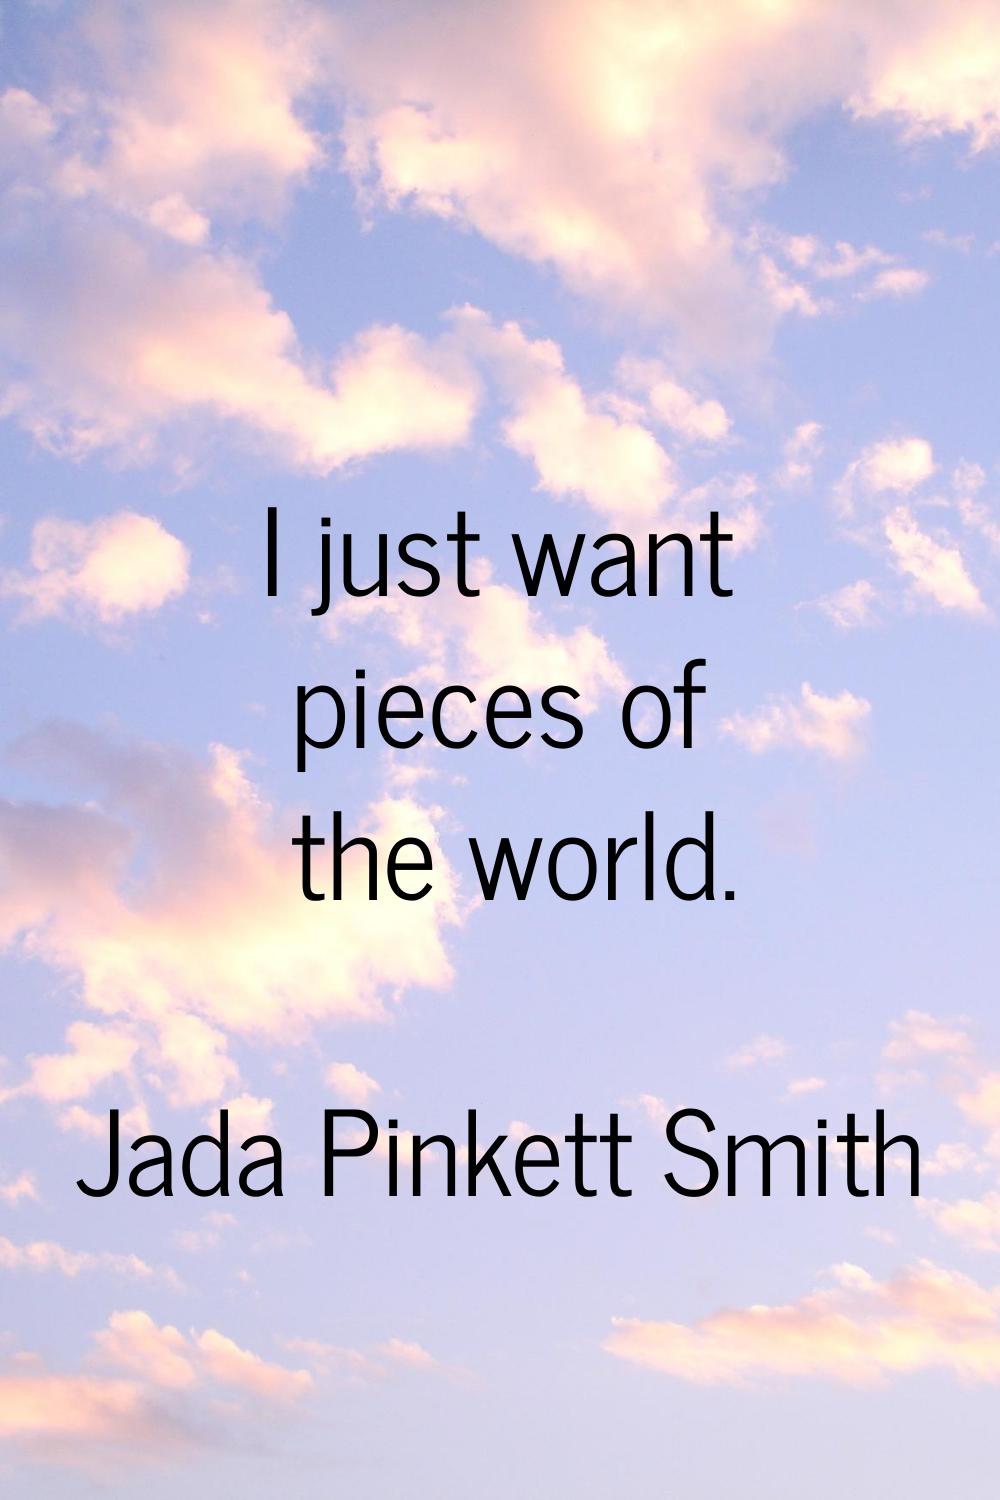 I just want pieces of the world.